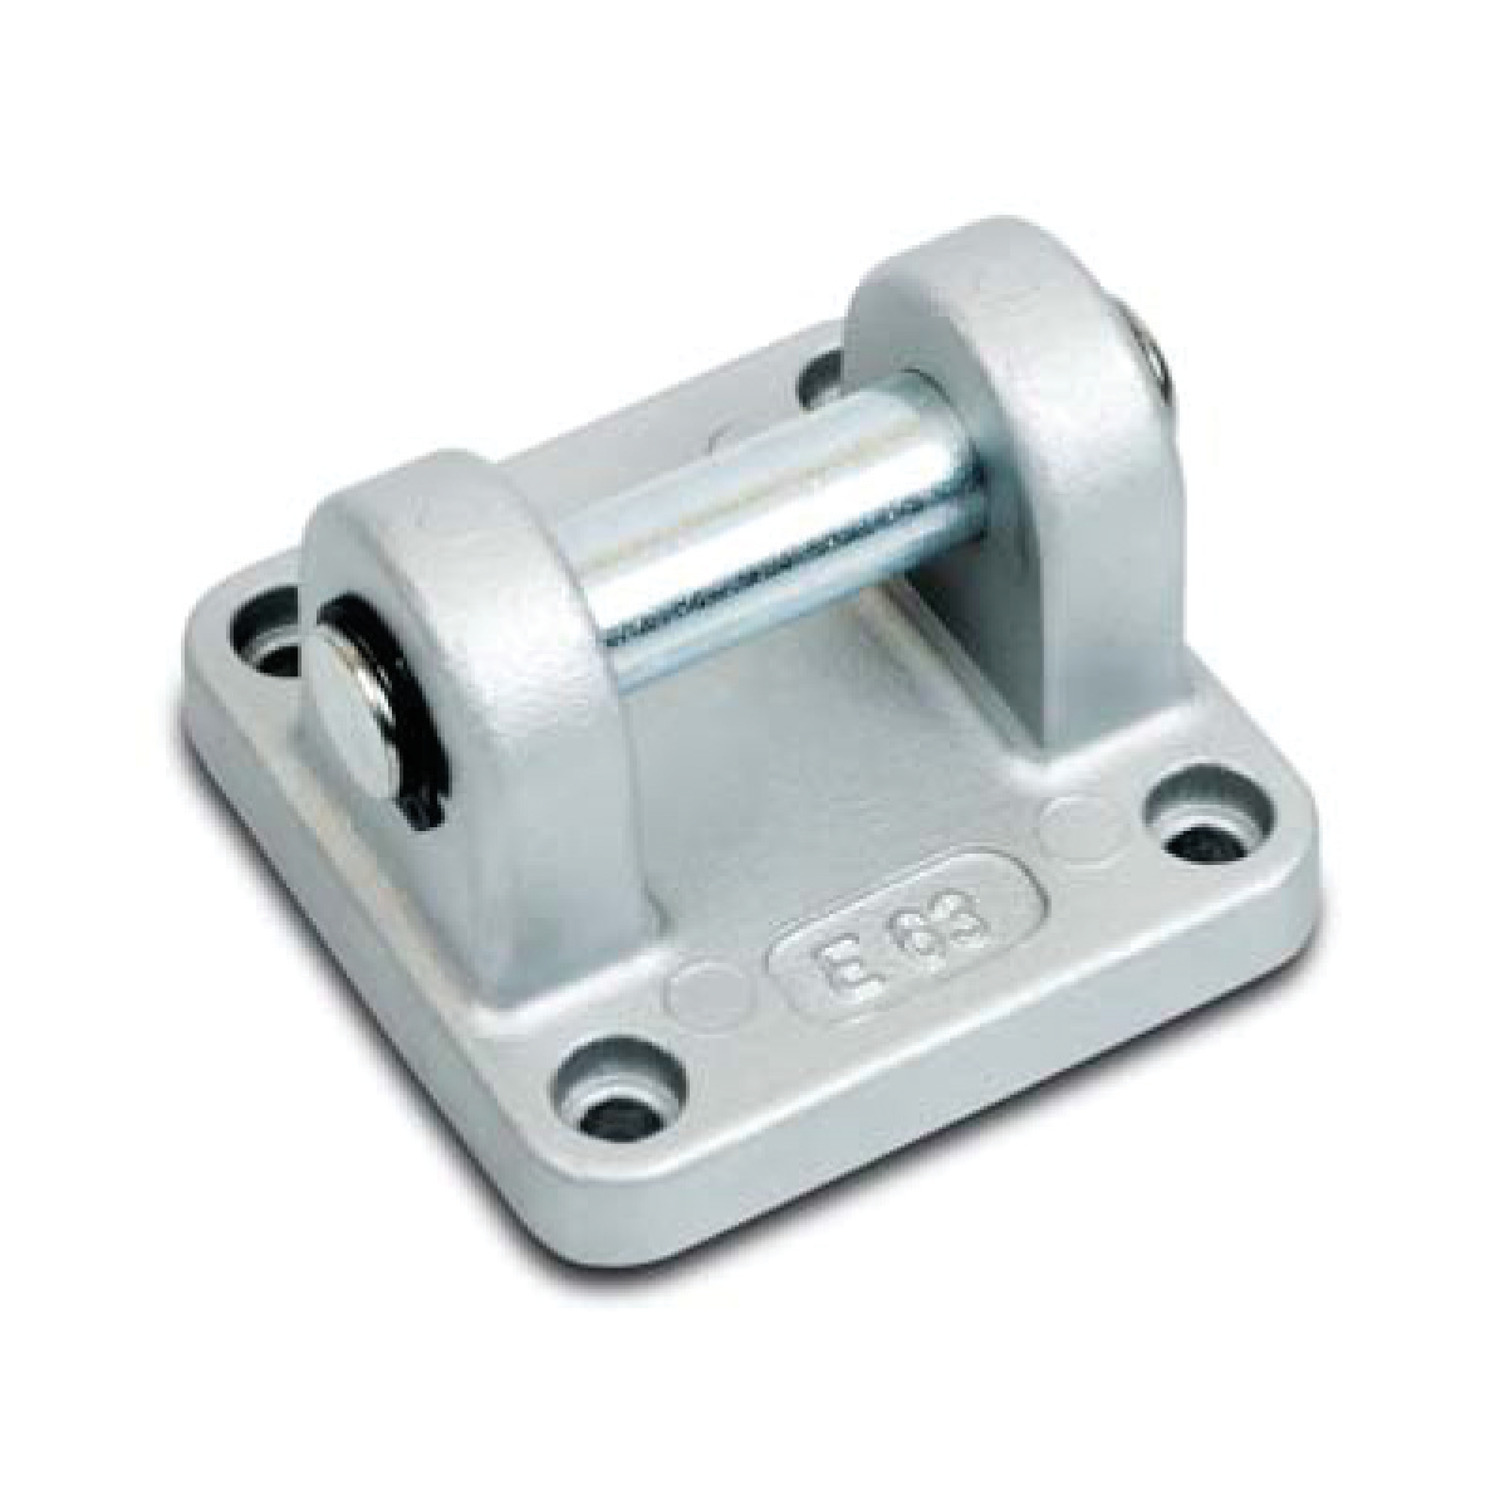 L4810 Air Cylinder Mounts - CETOP Series